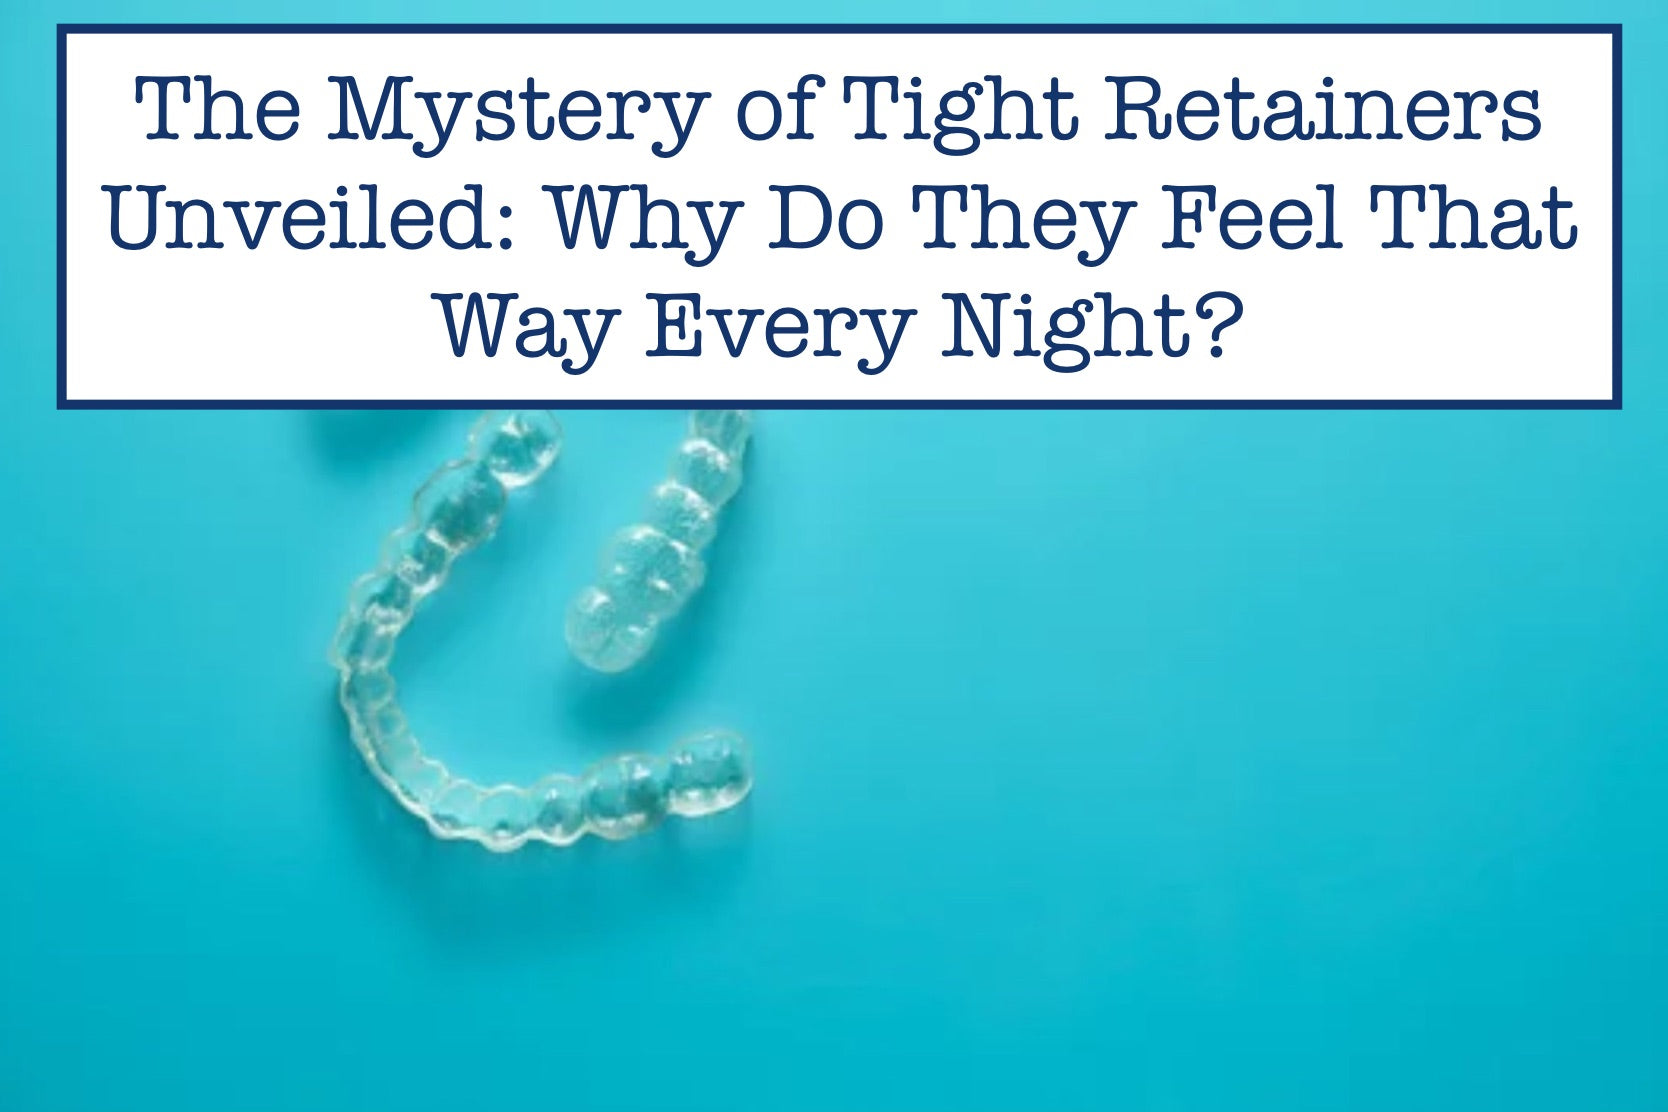 The Mystery of Tight Retainers Unveiled: Why Do They Feel That Way Every Night?